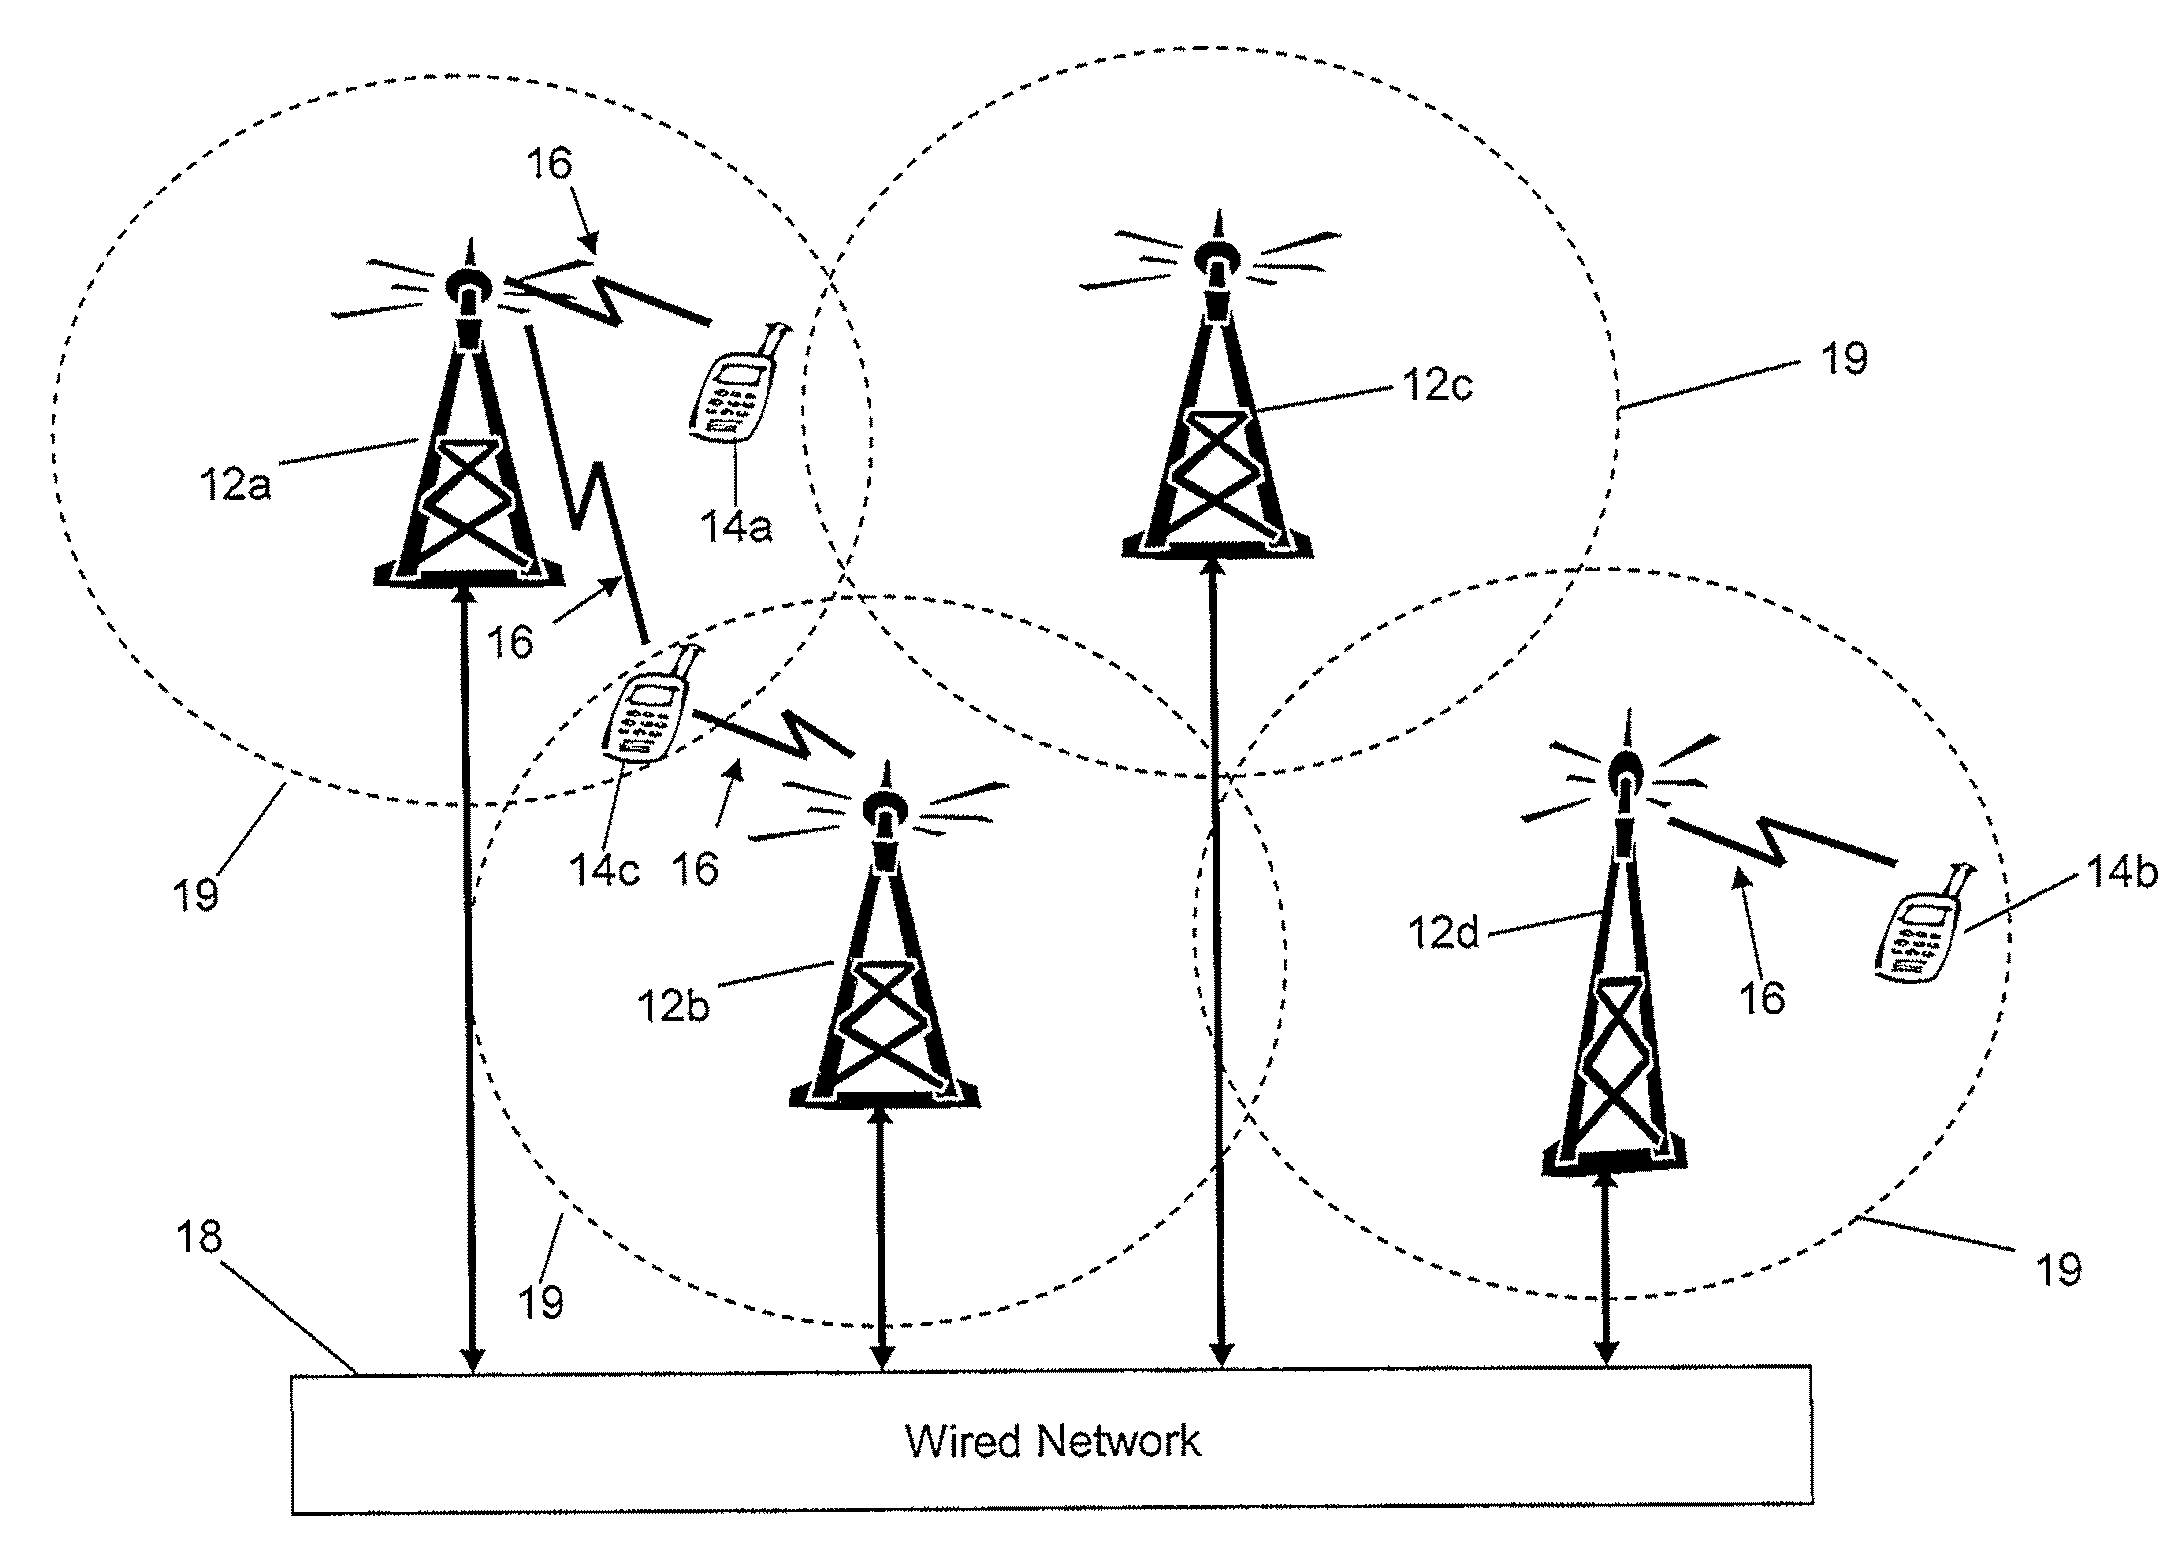 Method and Apparatus for Prolonging Battery Life in a Mobile Communication Device Using Motion Detection